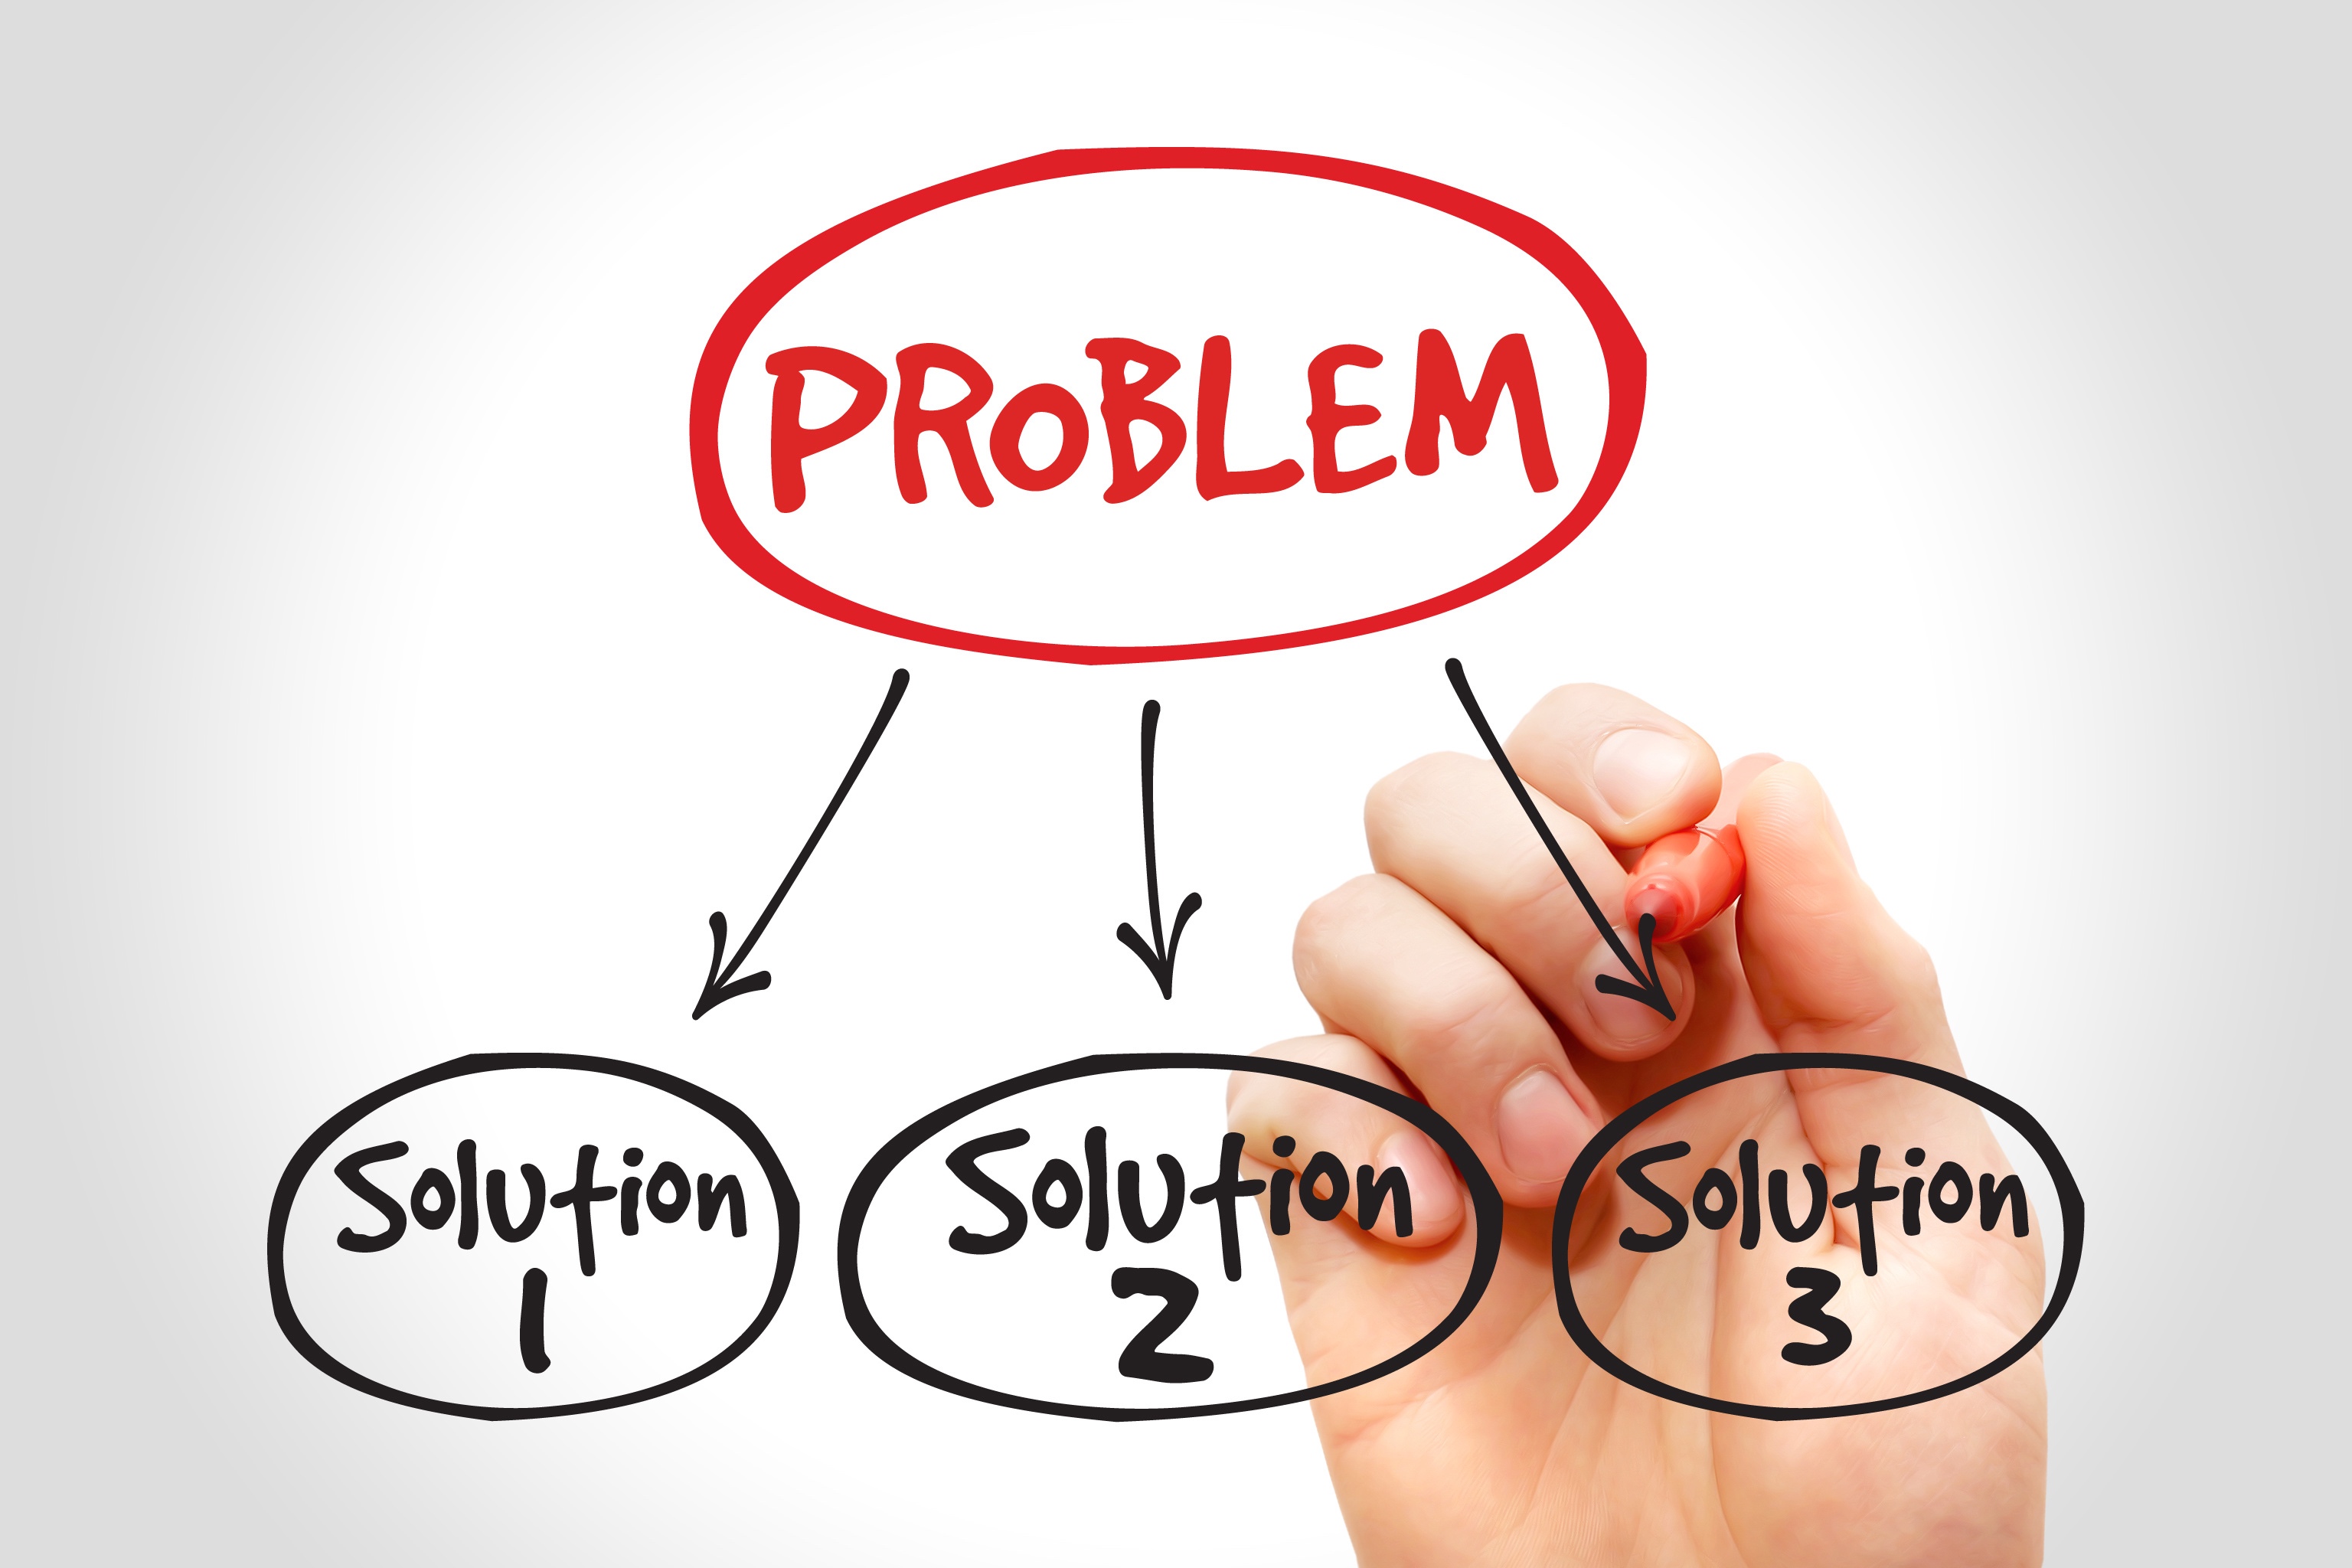 problem-solving-in-software-testing-a-conversation-stickyminds